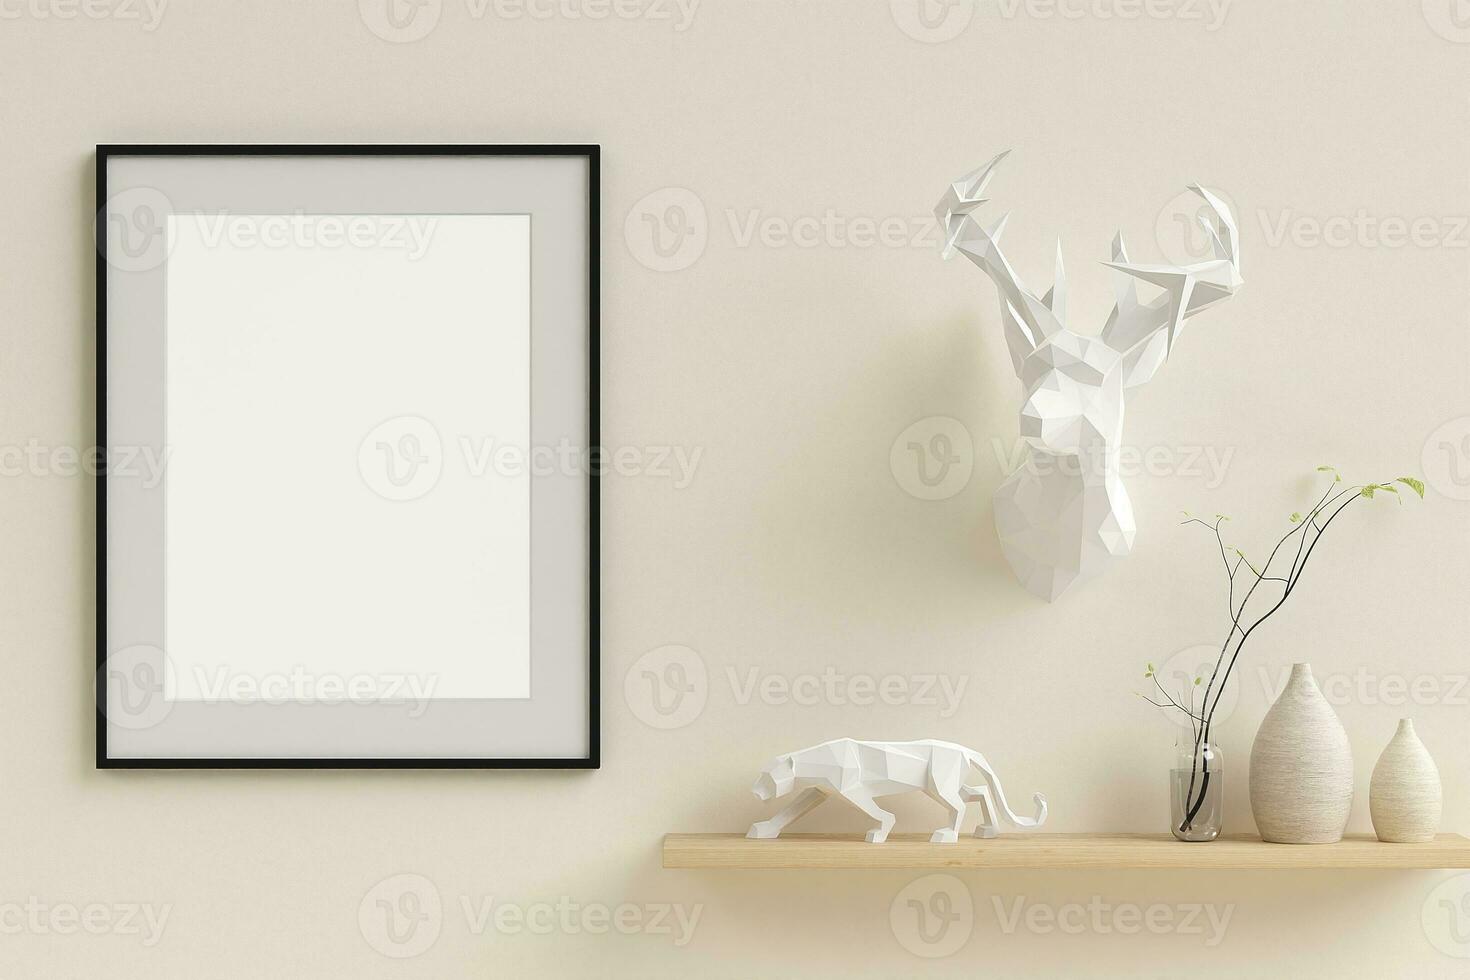 Framed poster on the wall with decor mockup photo